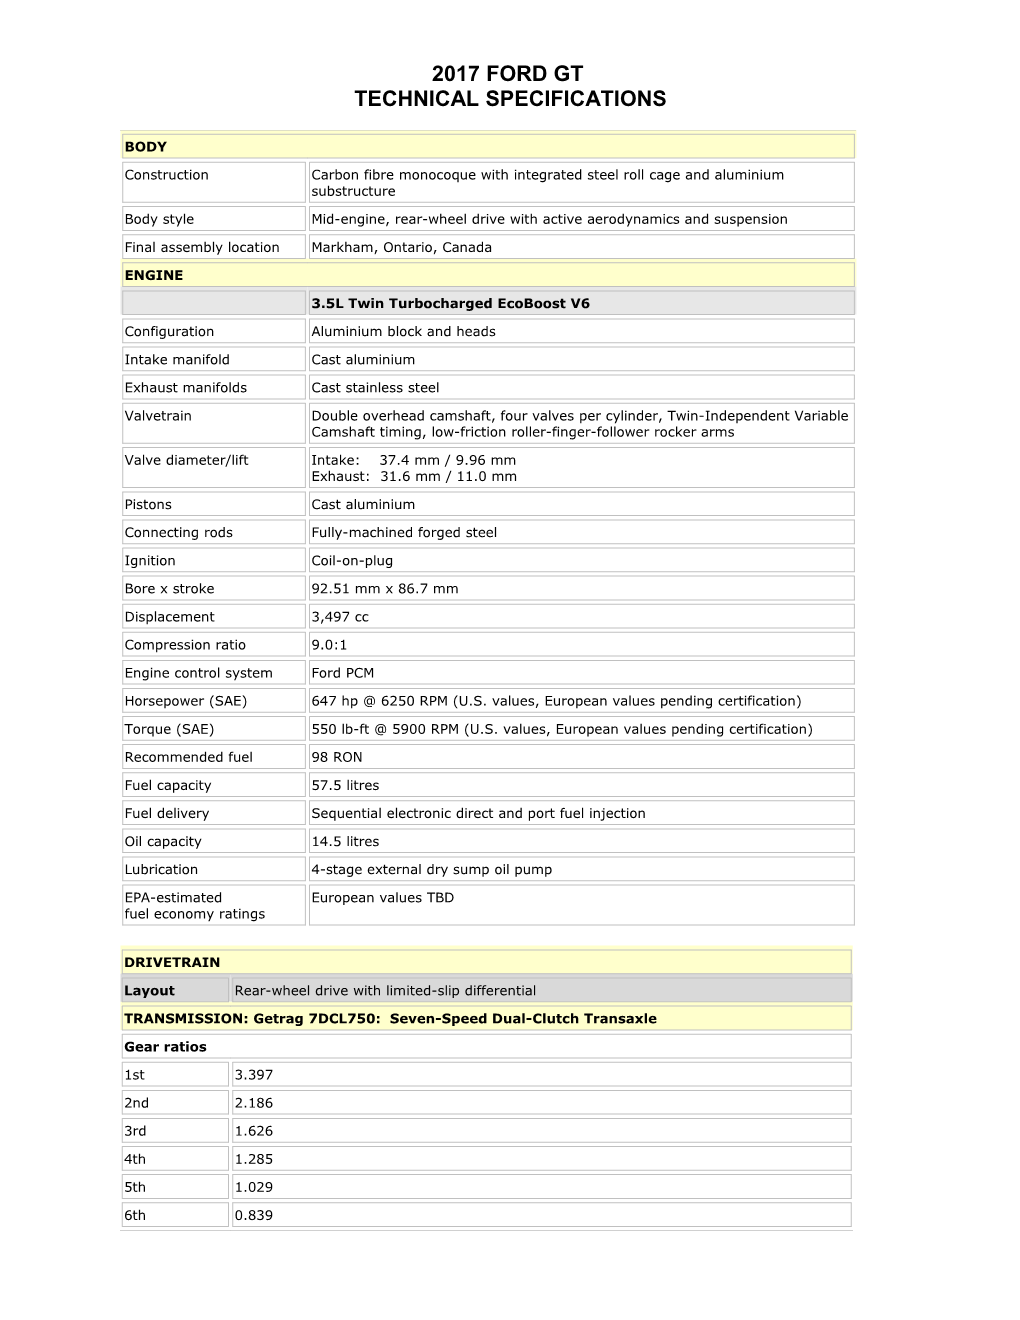 2009 Mustang Technical Specifications